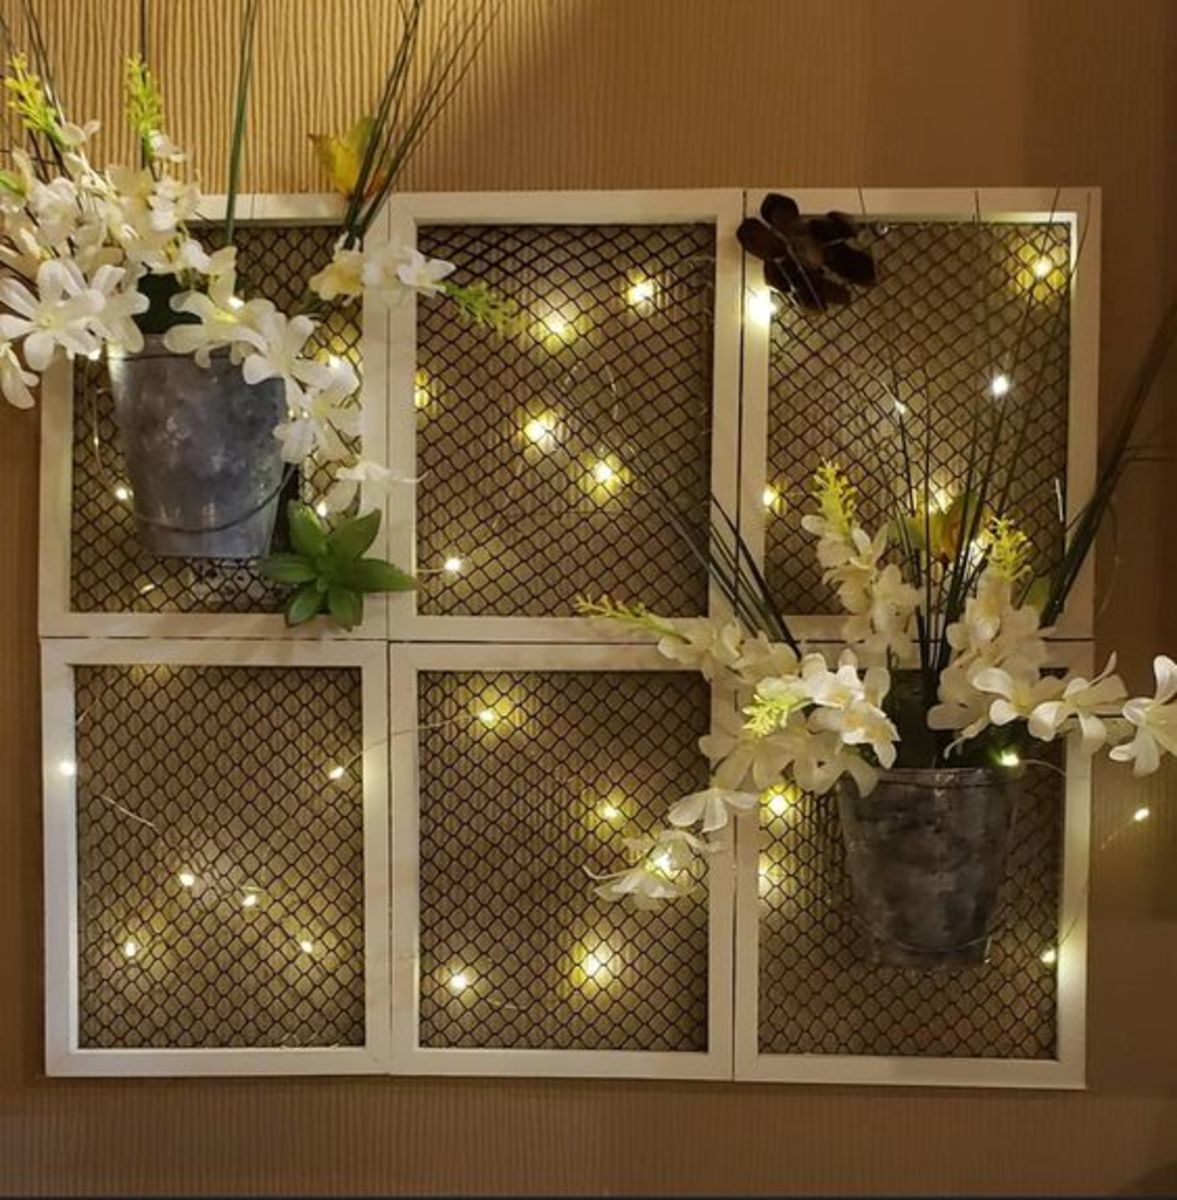 Plant display with lights